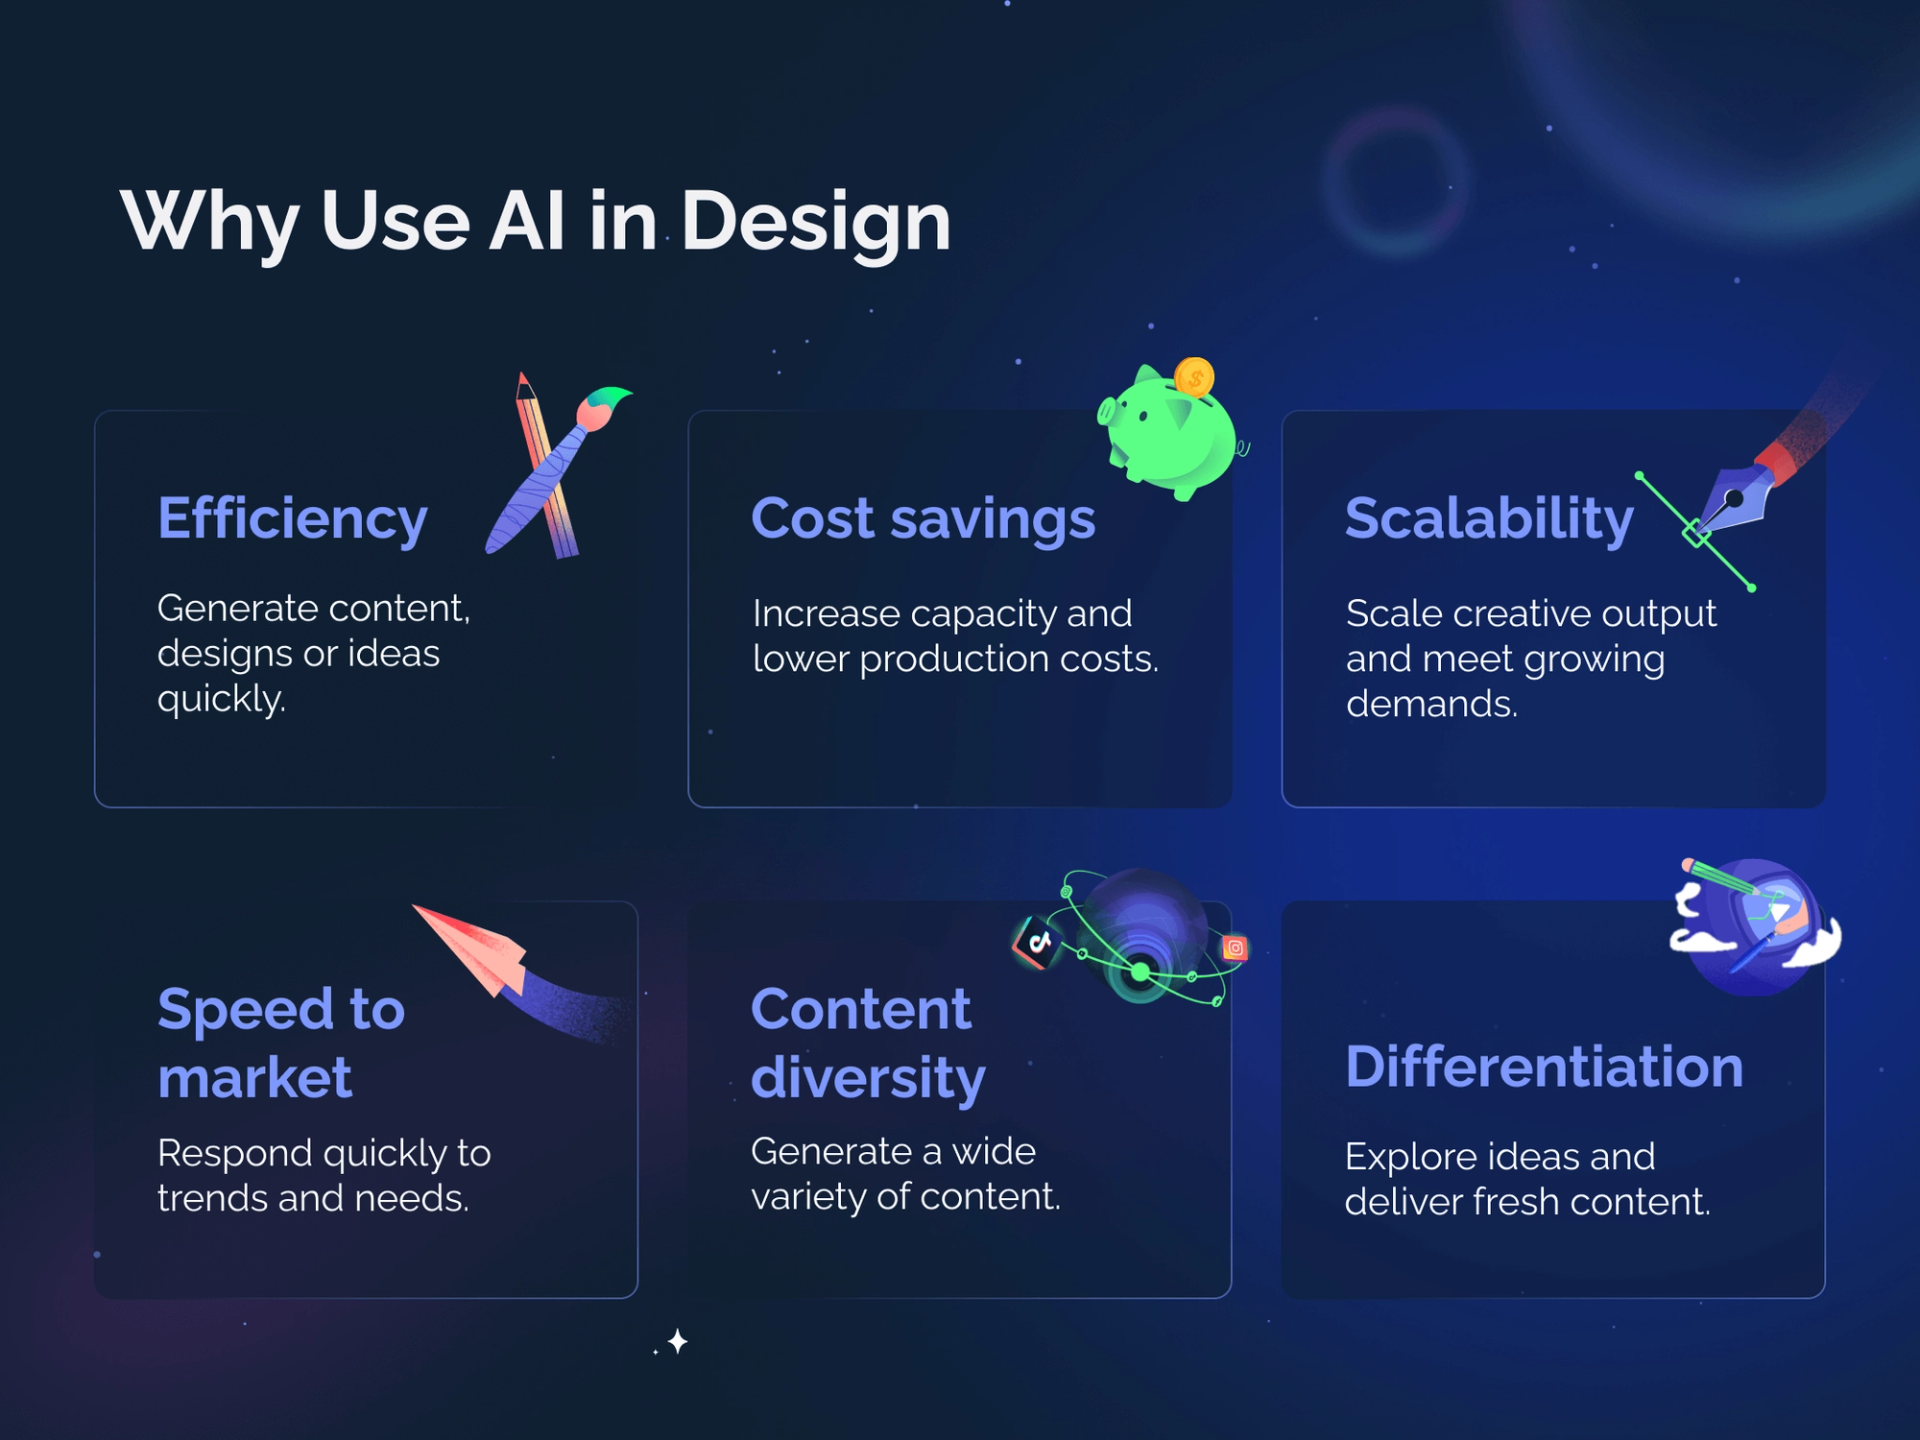 Why Use AI in Design